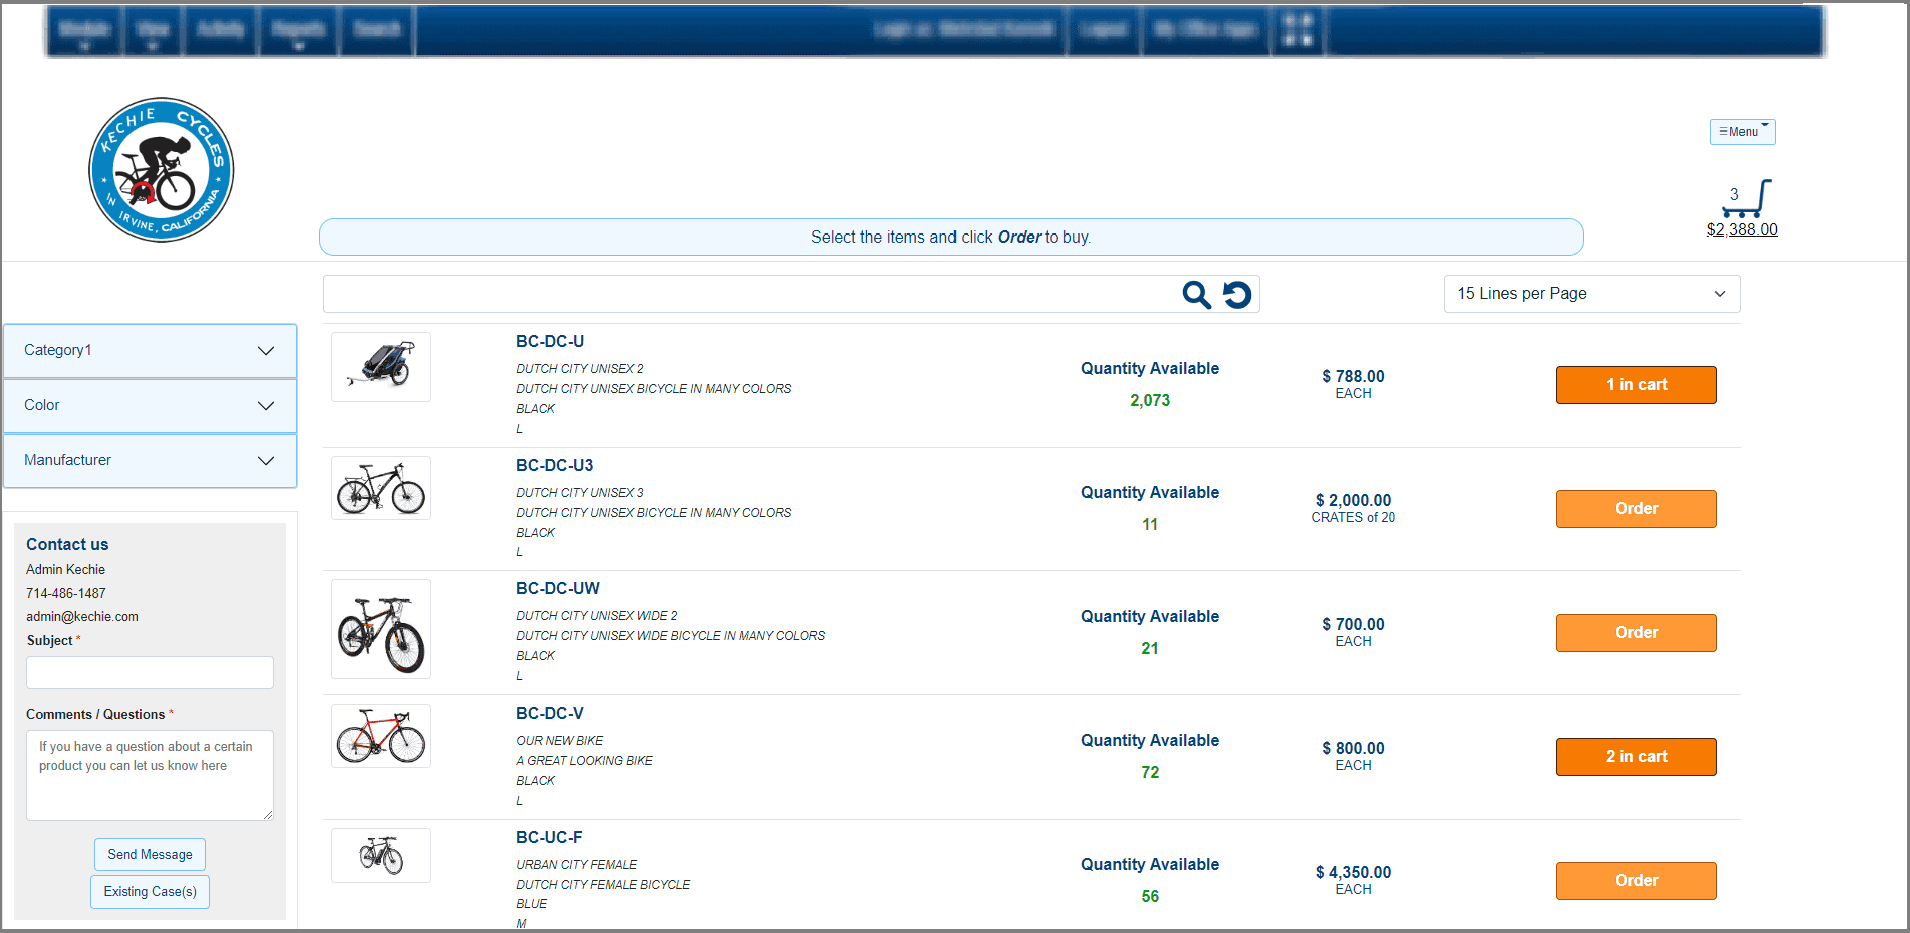 This is an image of how the B2B Ecommerce Portal from Kechie looks.